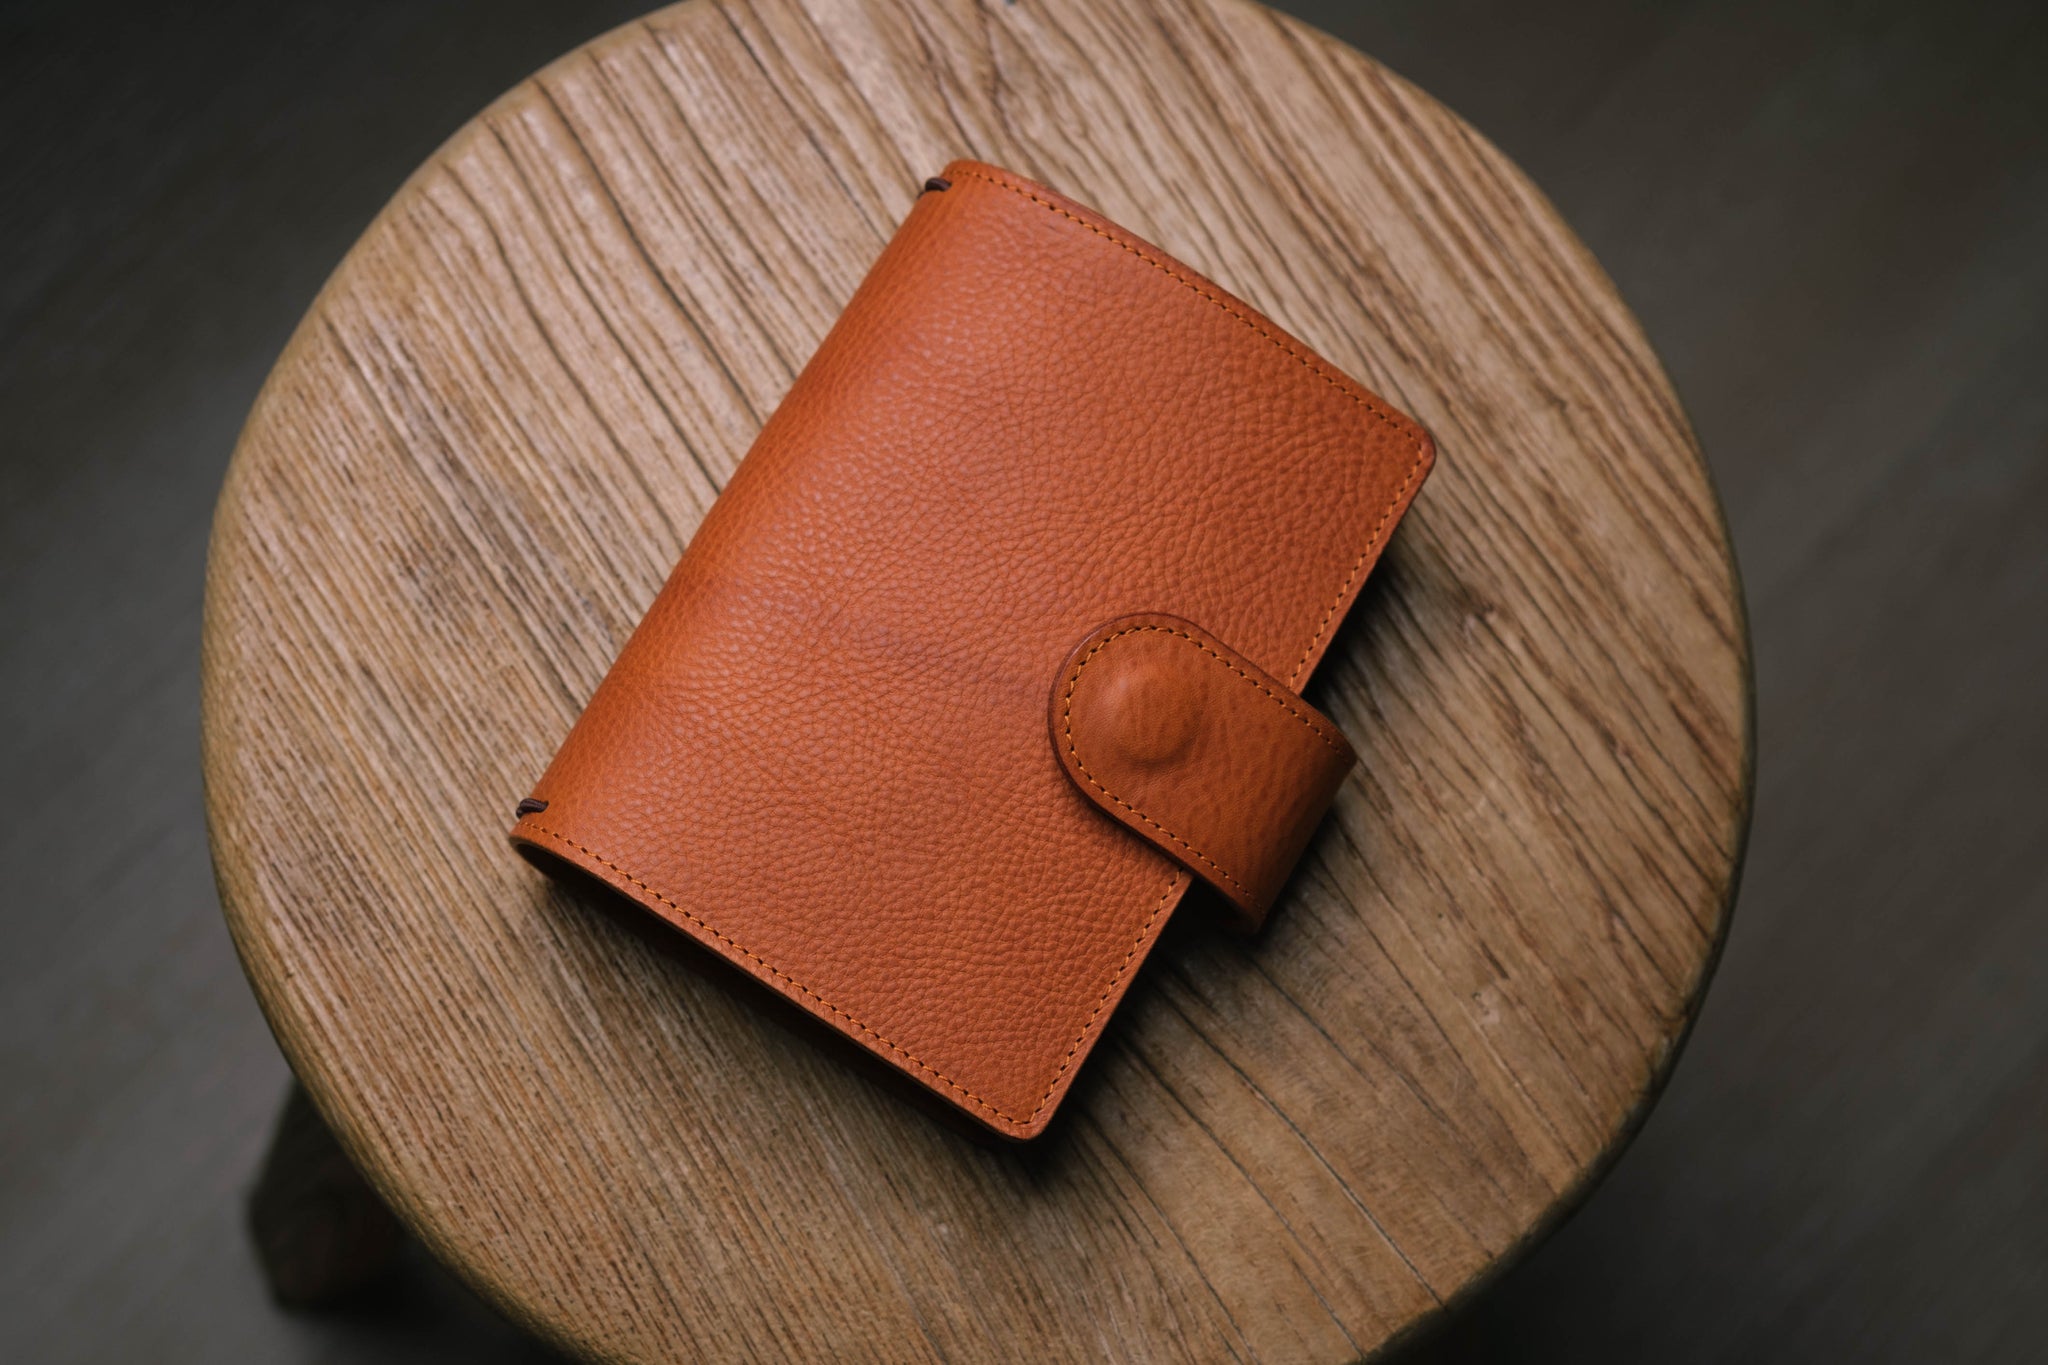 ALL SIZES - Orange-brown Pebbled Leather Stitched Traveler's Notebook w/ Strap Closure (No inserts included)